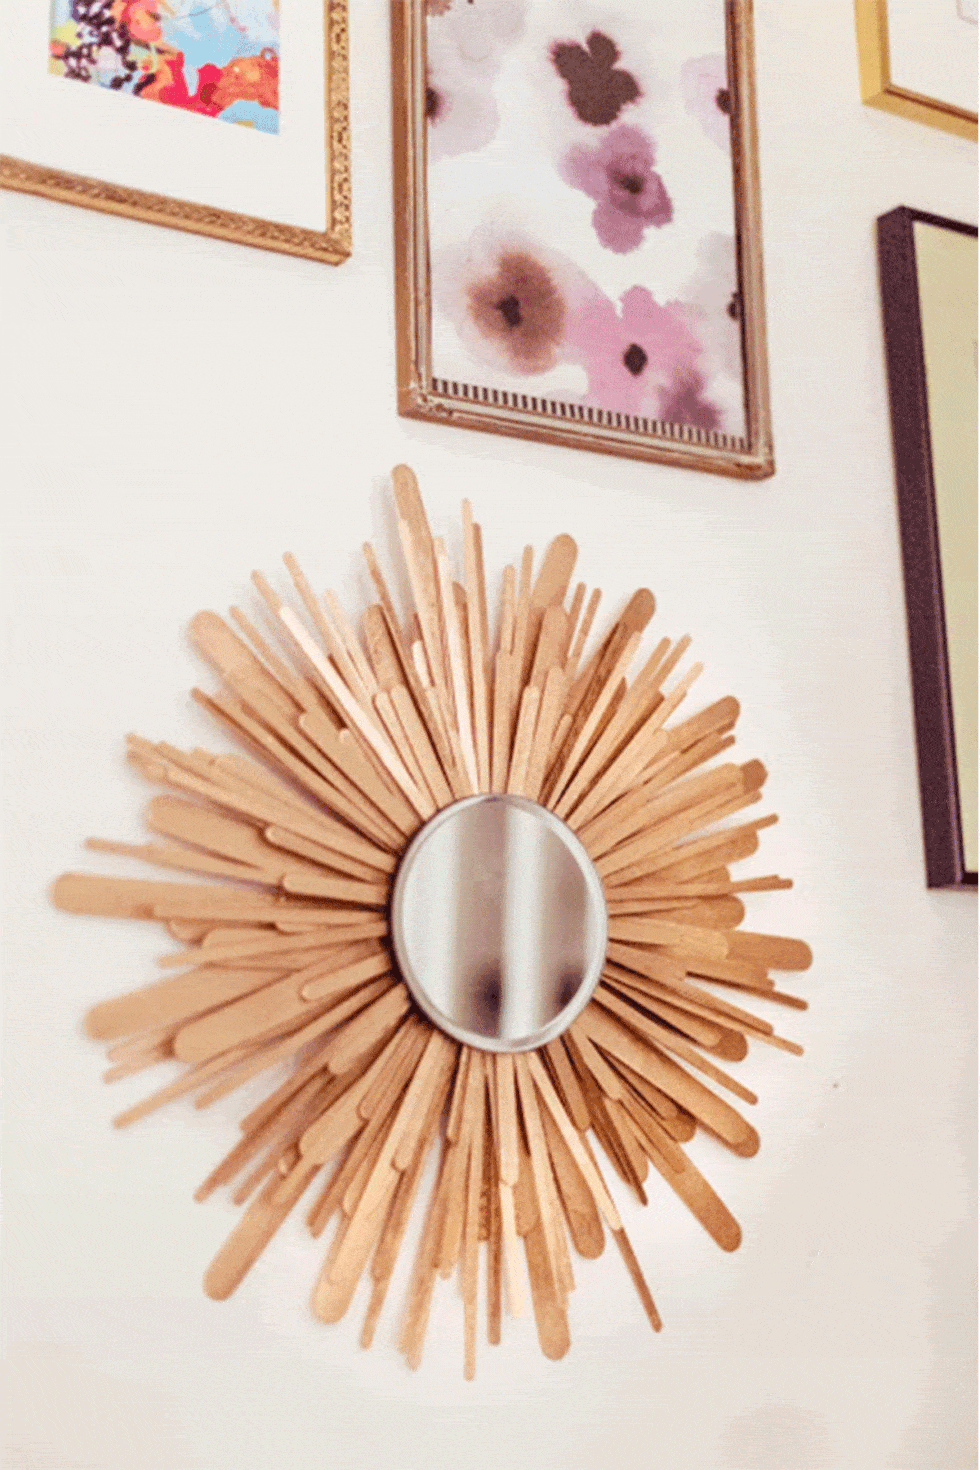 Art of DIY: Make your own decorative popsicle stick display shelves